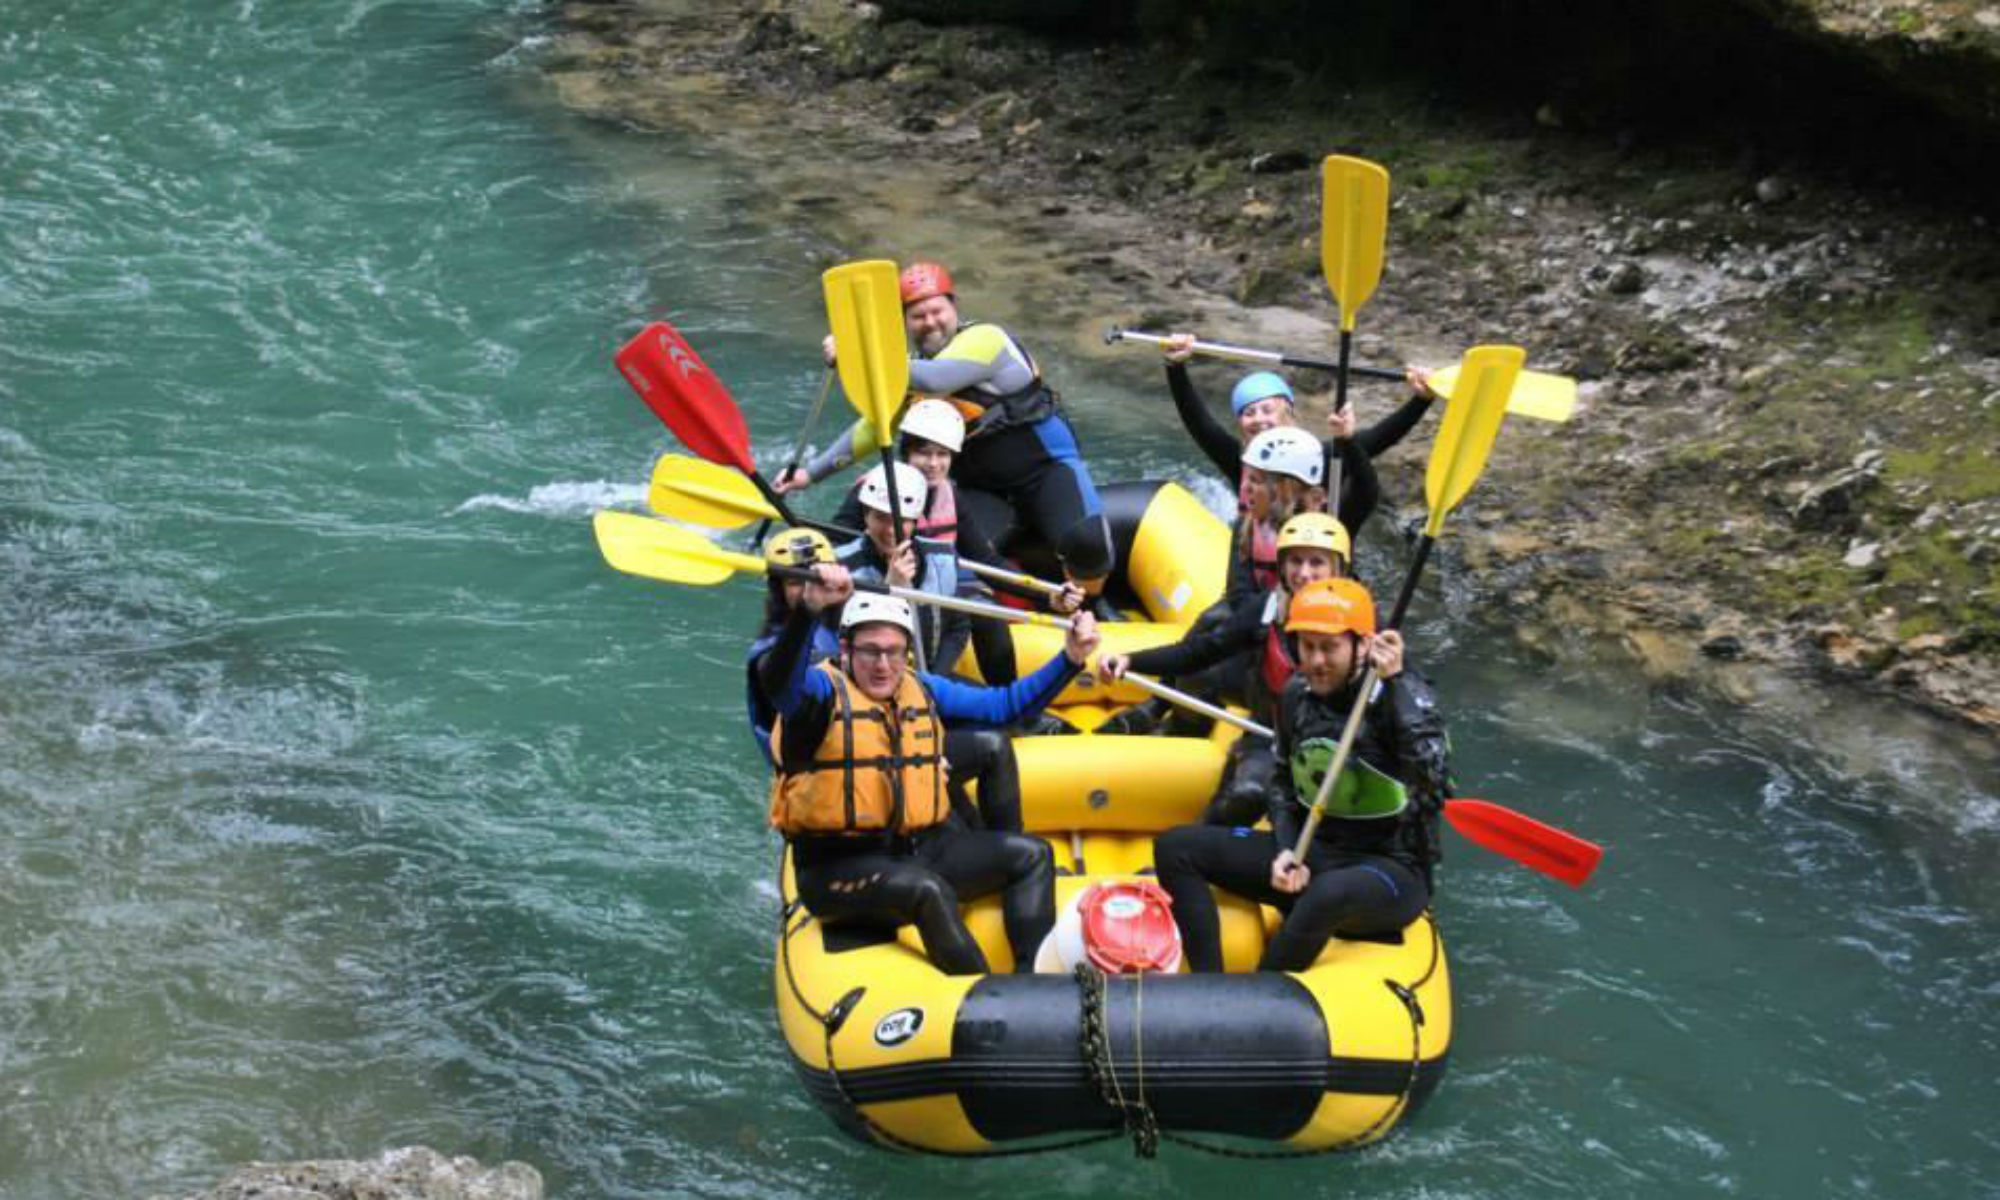 A group of people in a rubber dinghy on the Salza River while out white water rafting in Austria.